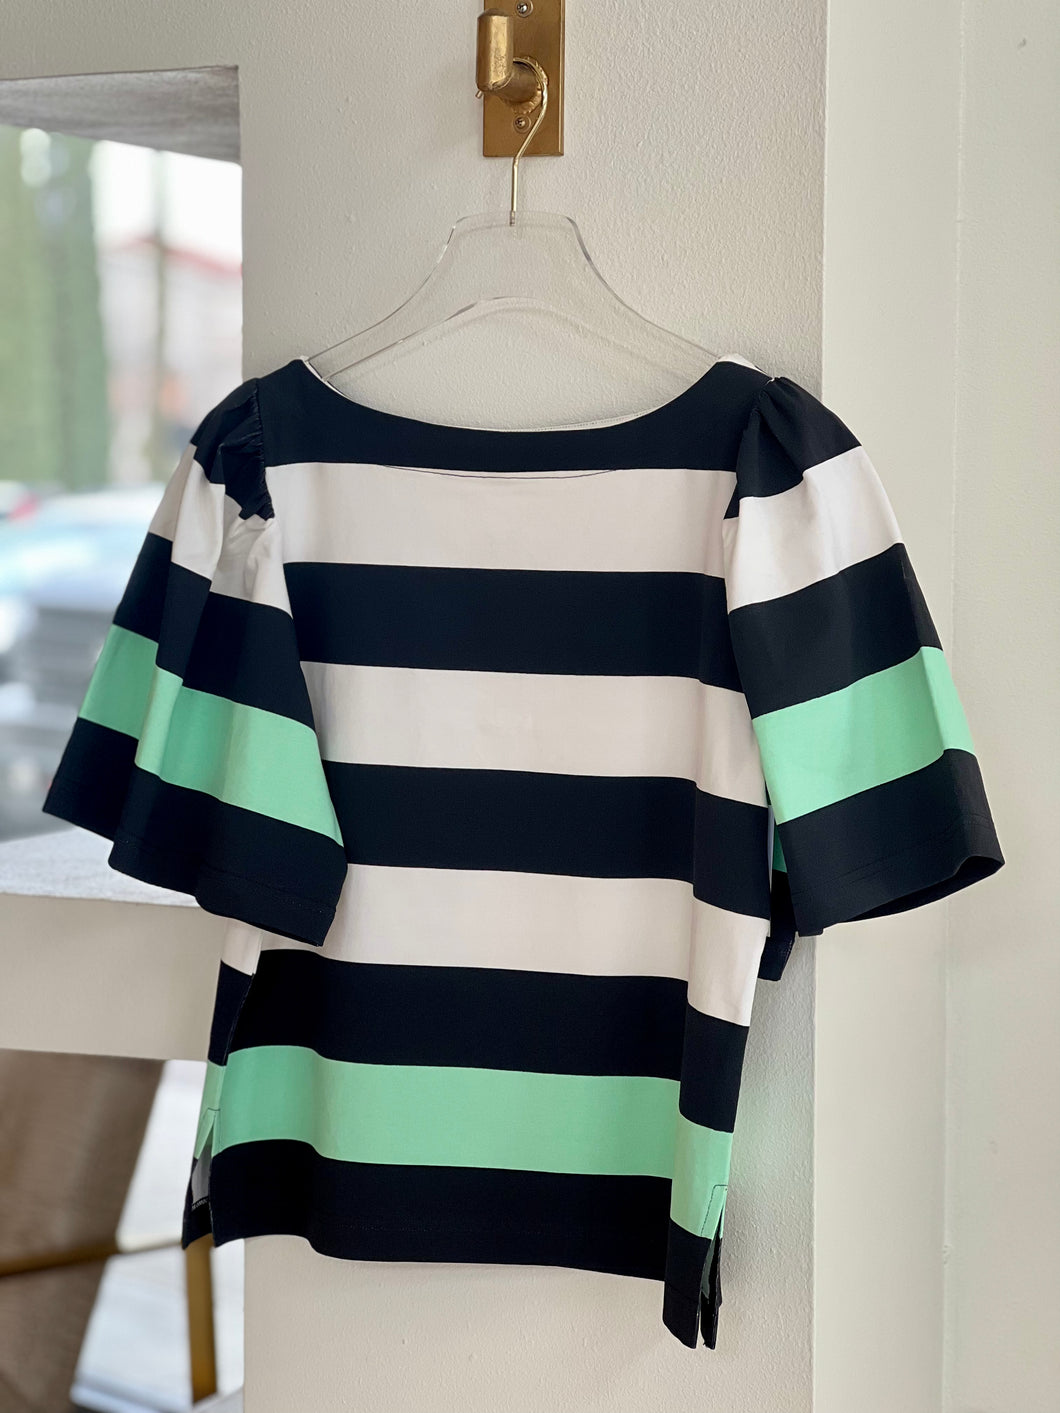 Ps1906 Striped Puff Sleeve Top